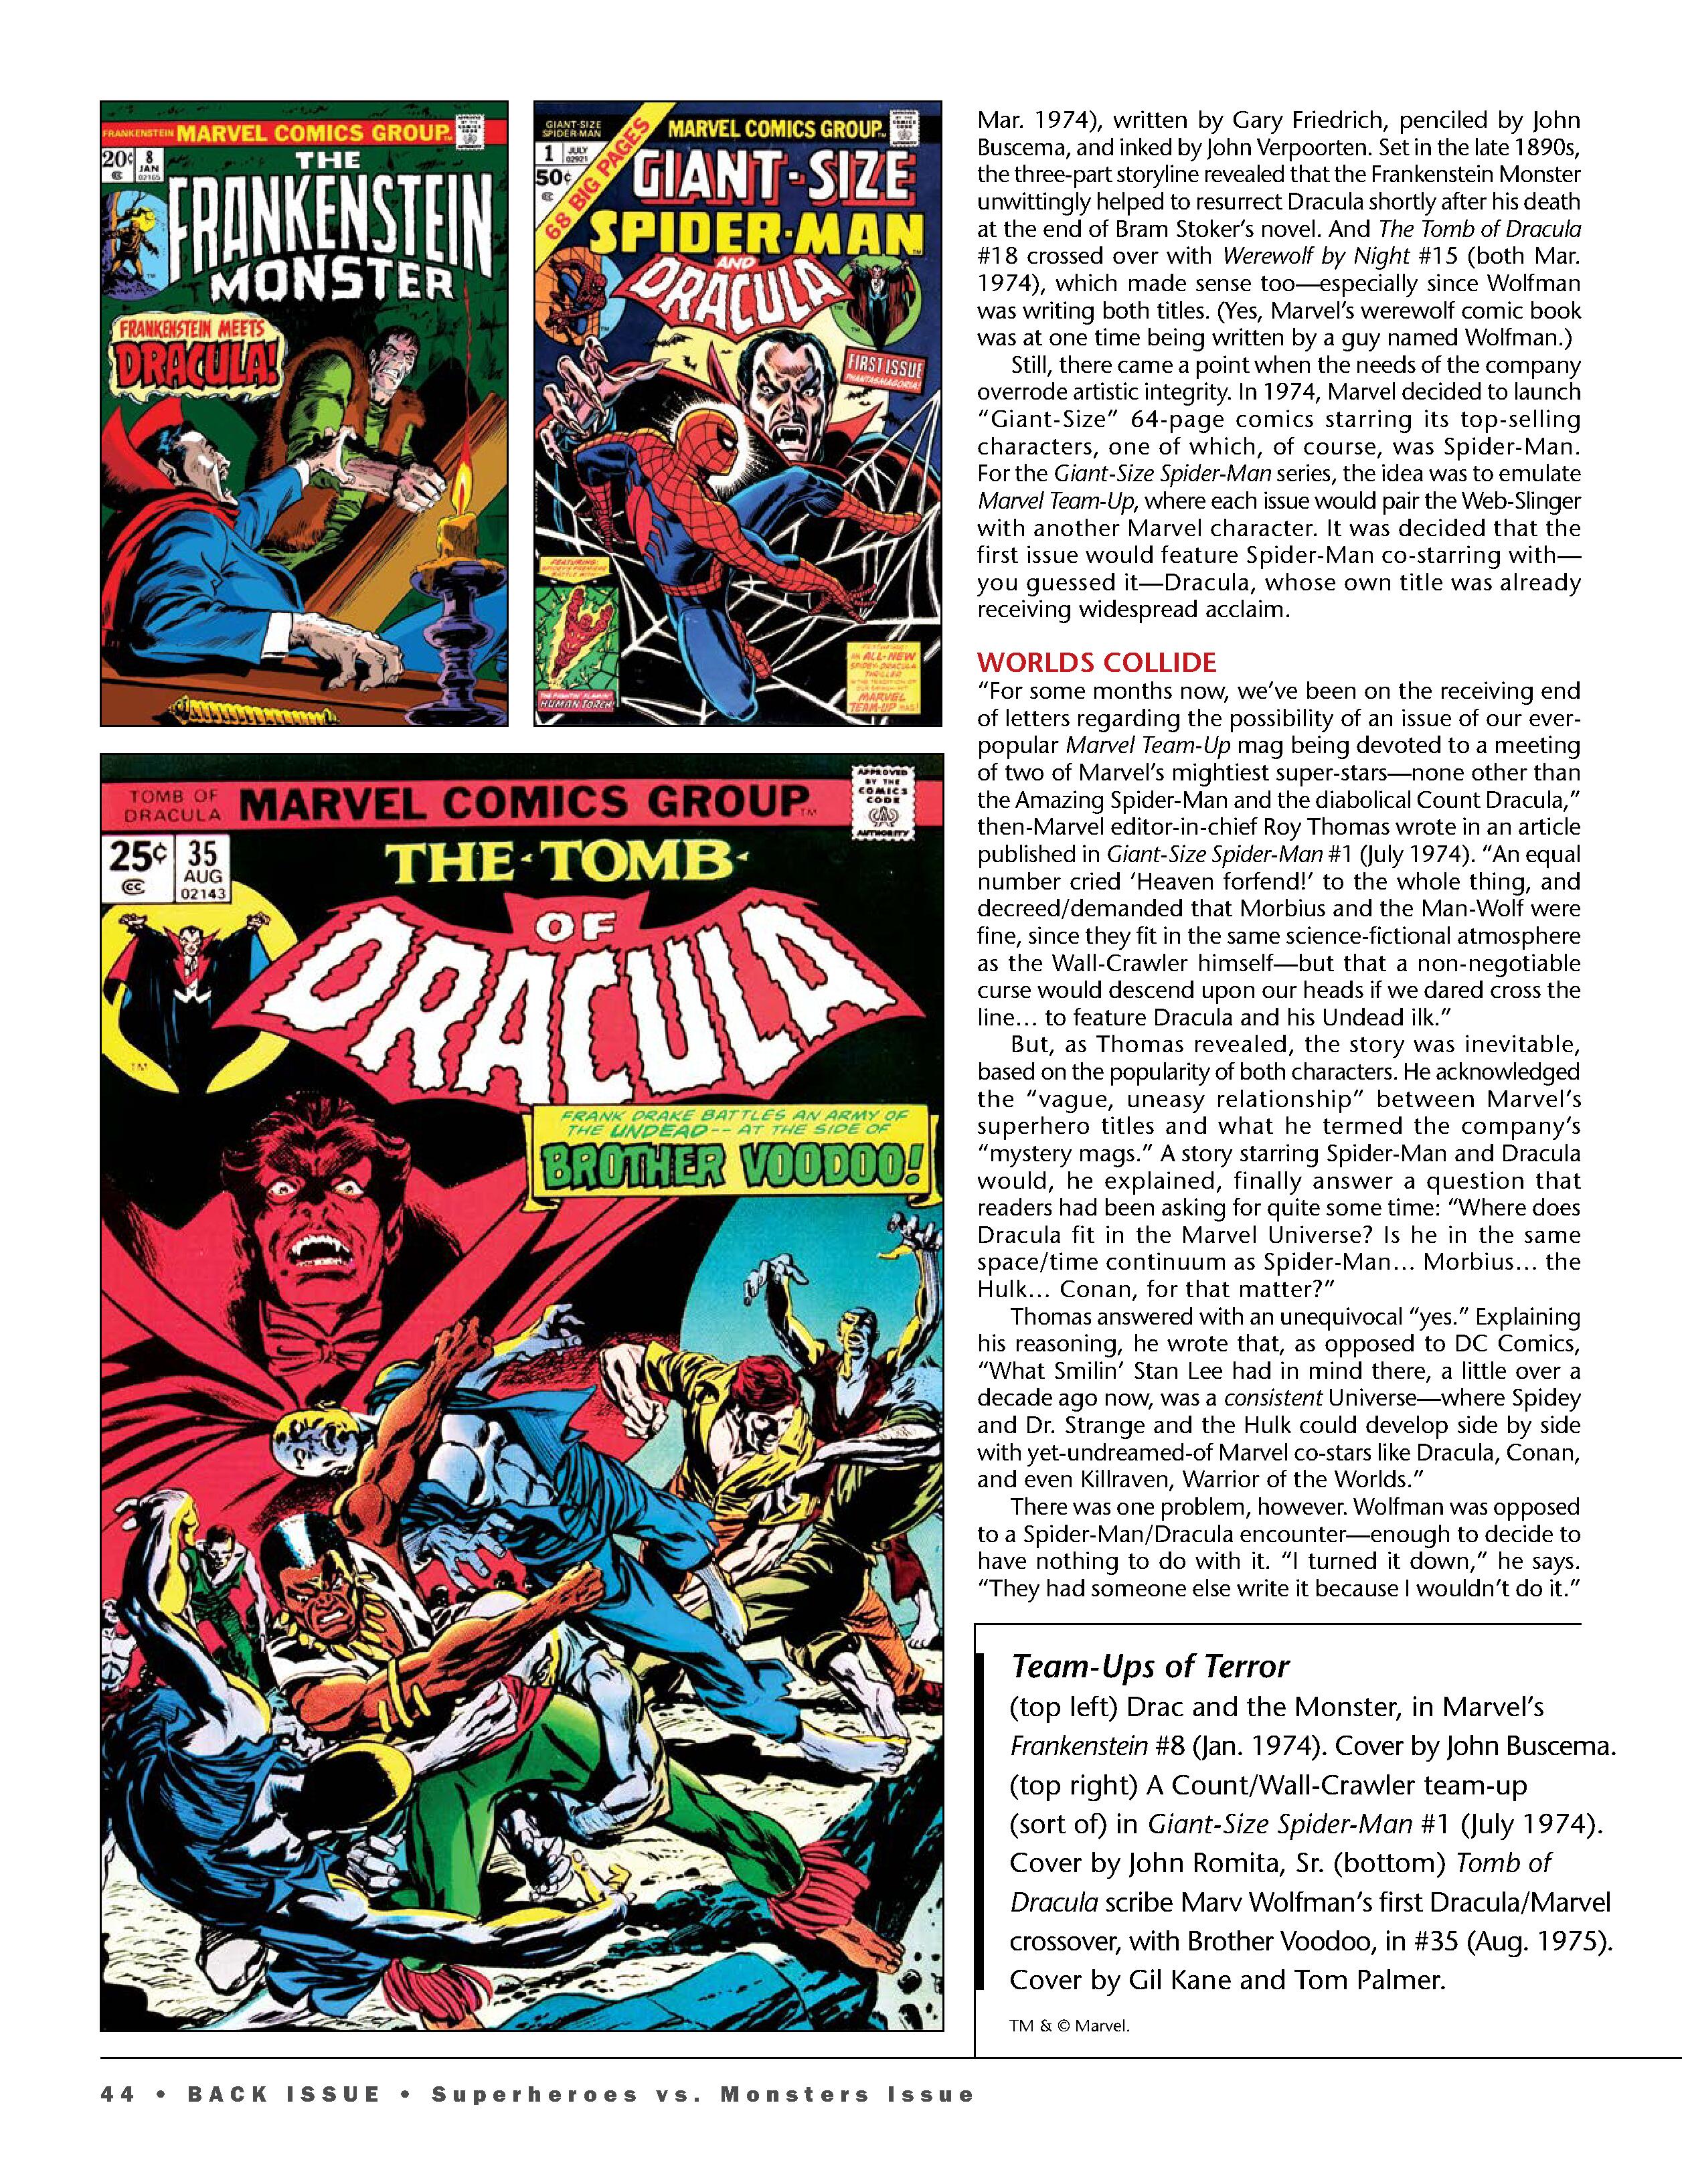 Read online Back Issue comic -  Issue #116 - 46